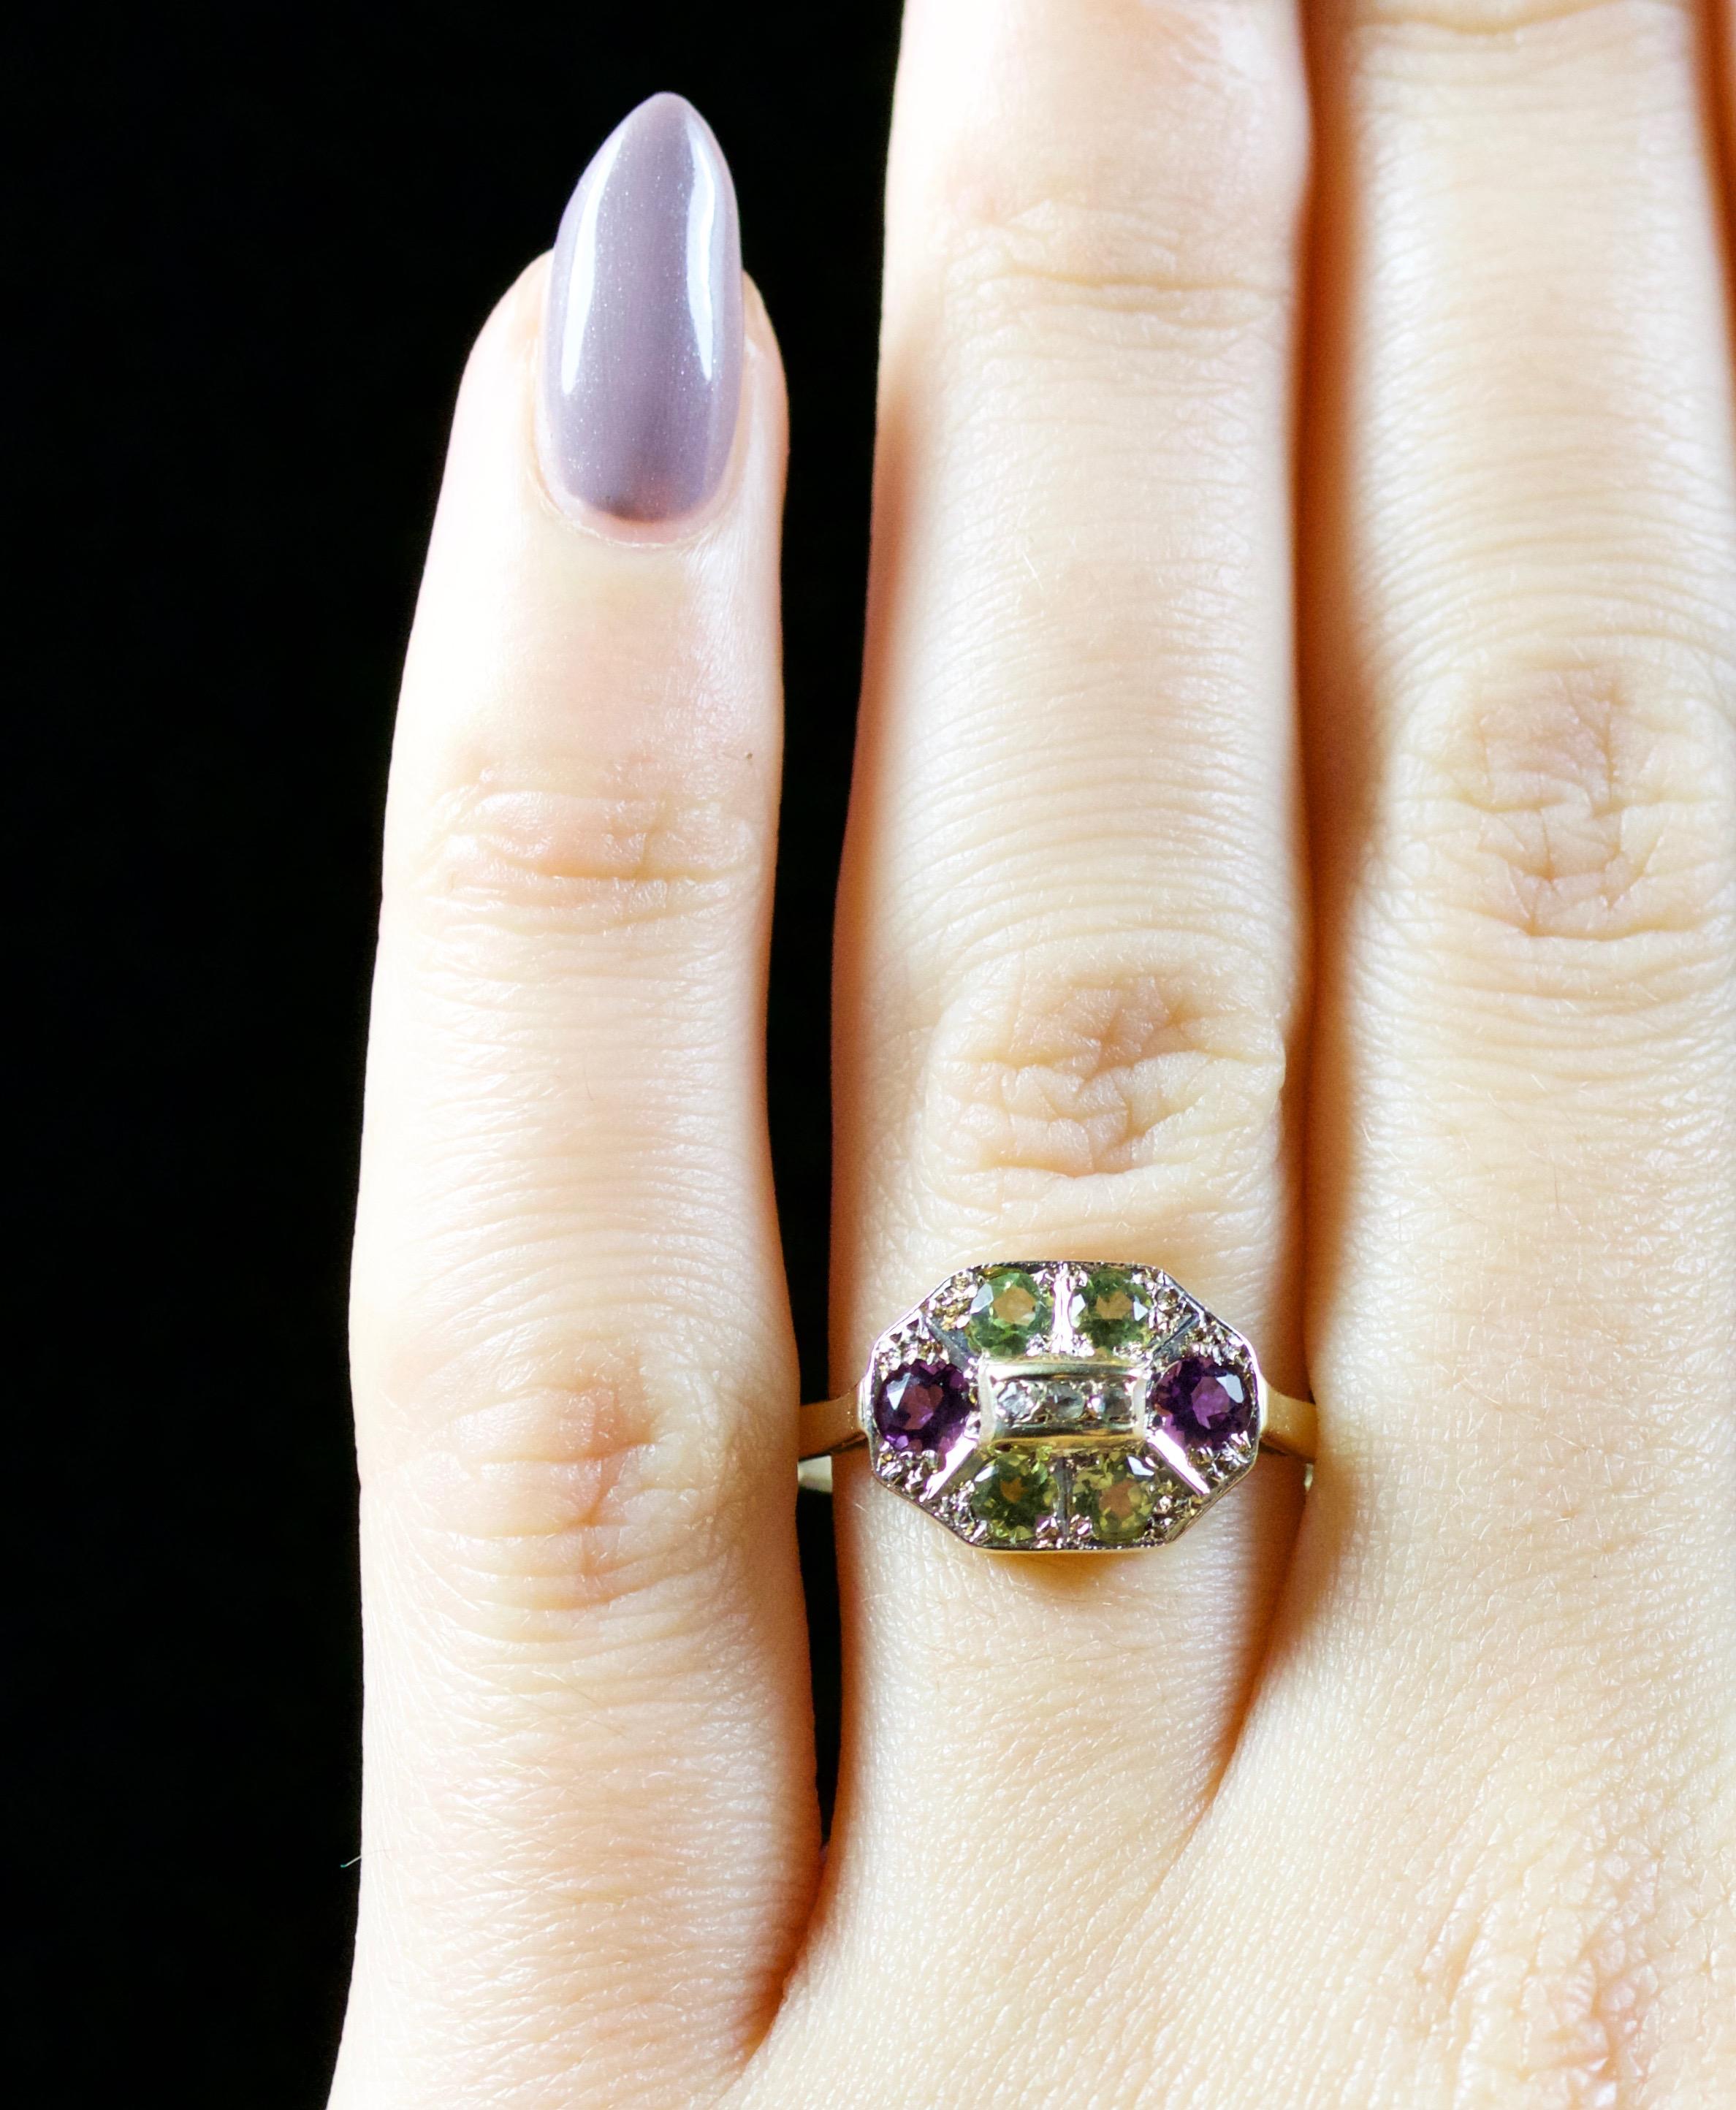 Antique Victorian Suffragette Ring Diamond Amethyst Peridot 18 Carat Gold For Sale 1